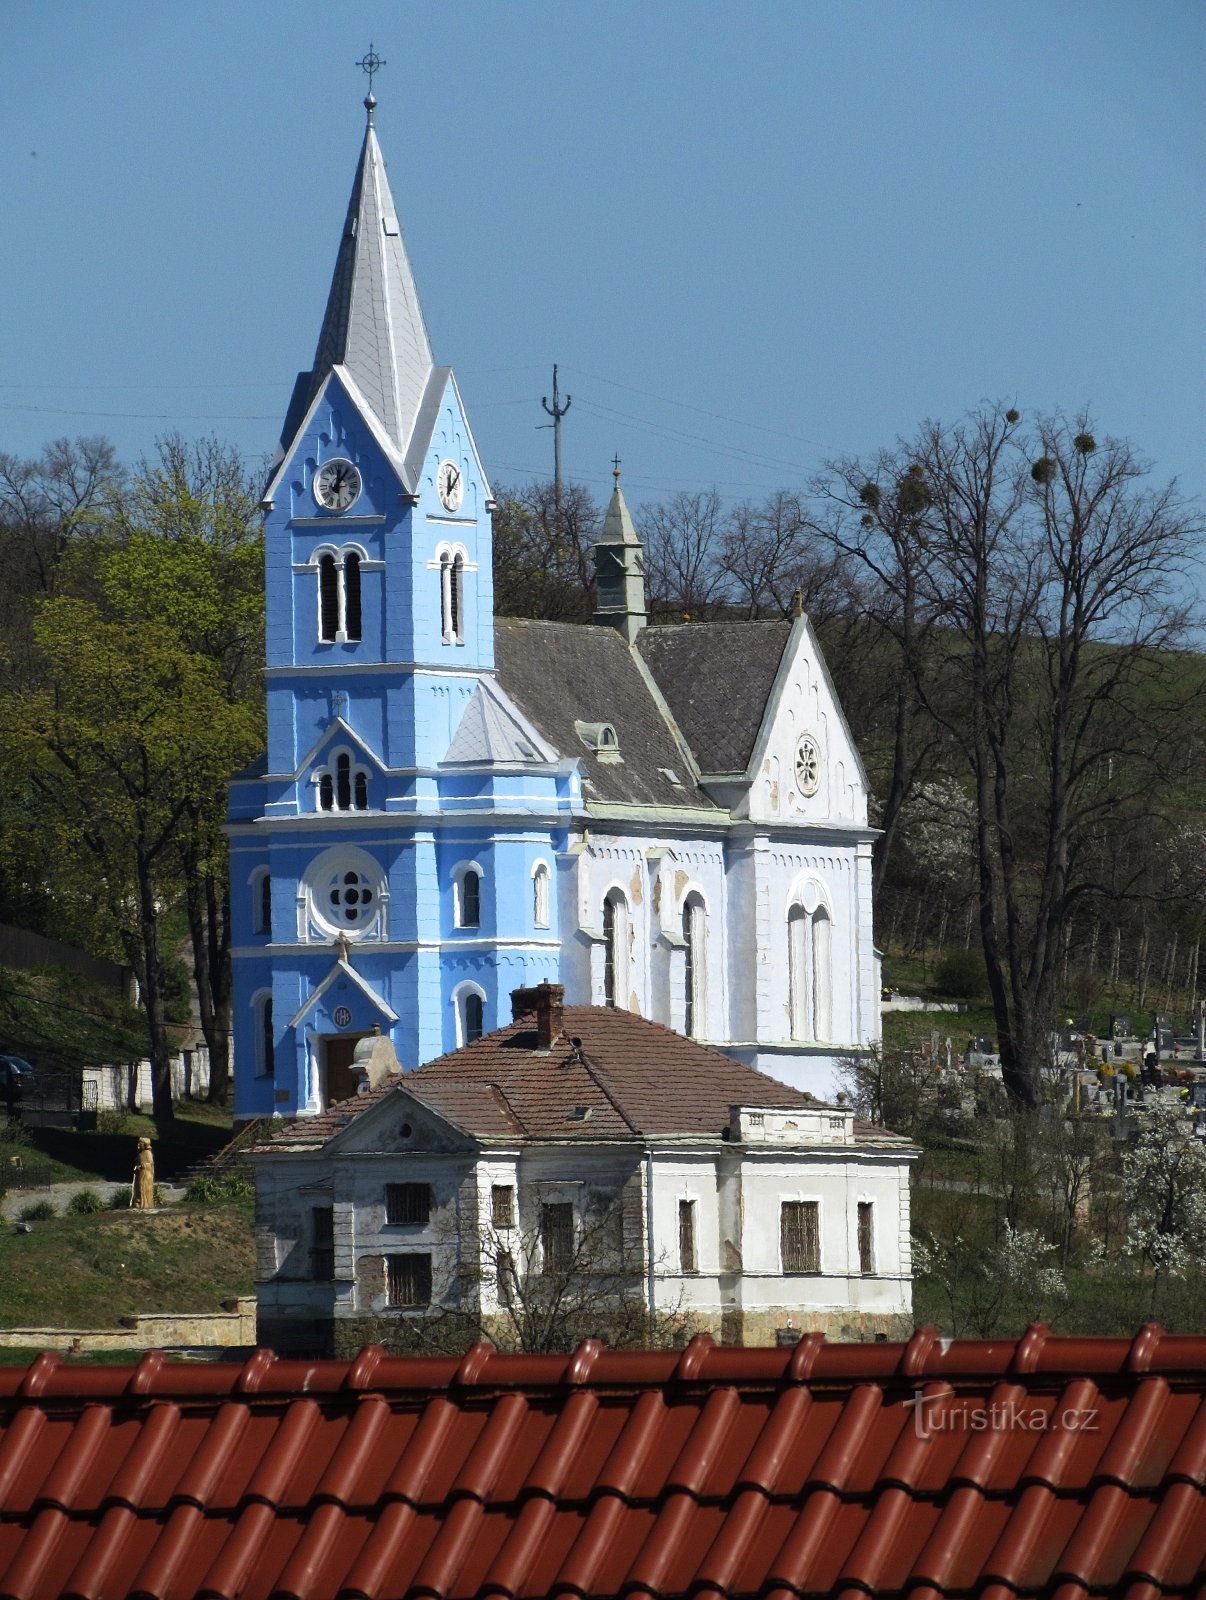 church and parsonage